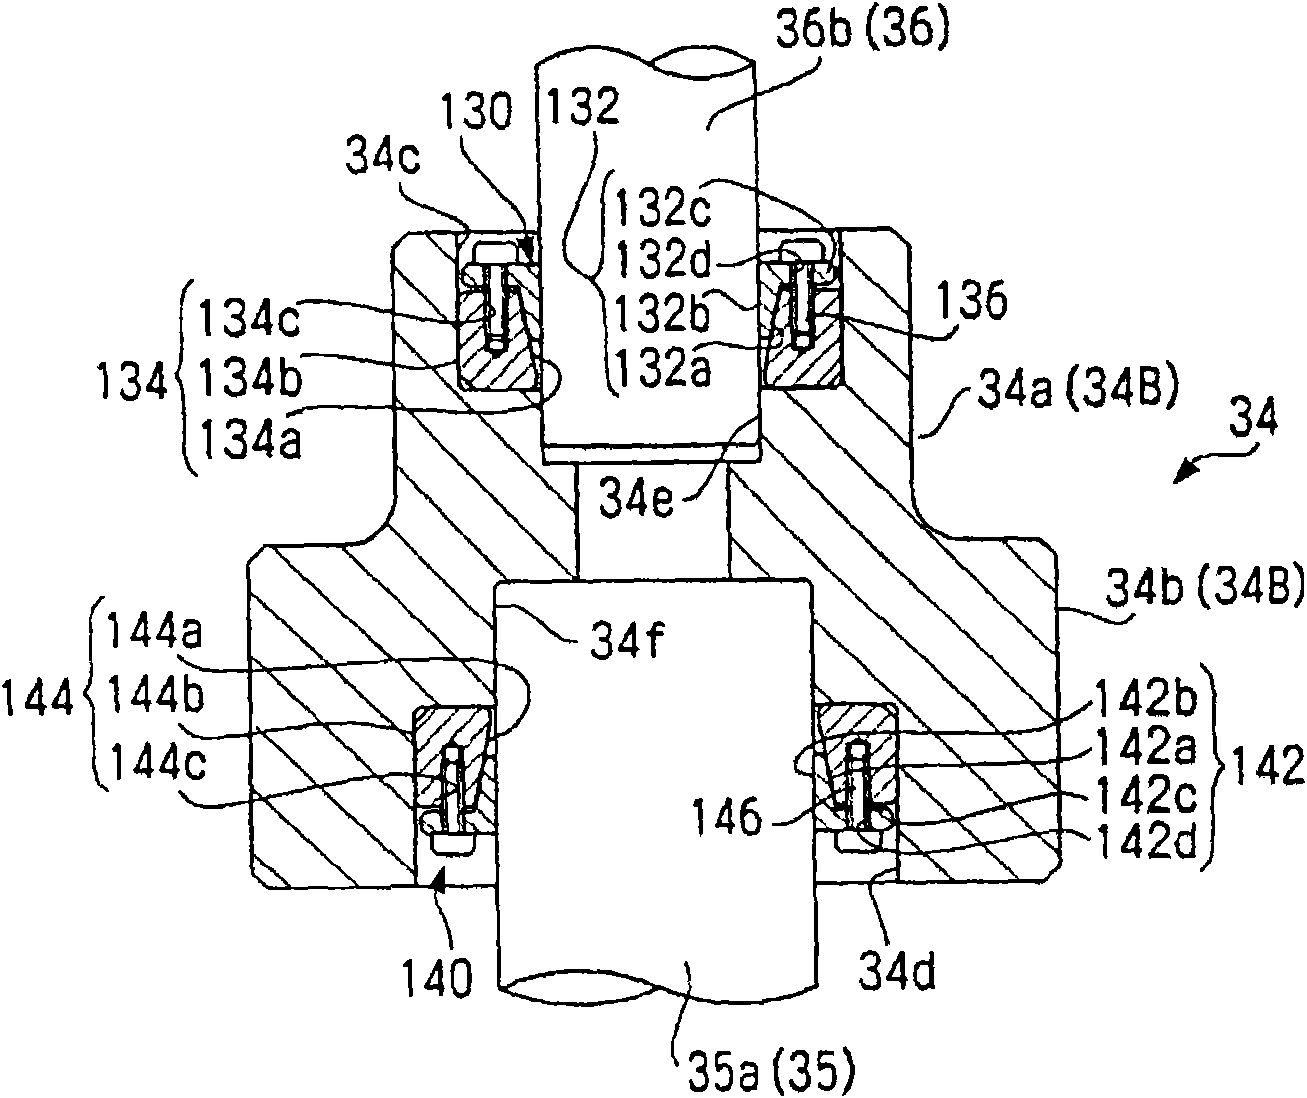 General-purpose test device, linear actuator, and twist test device